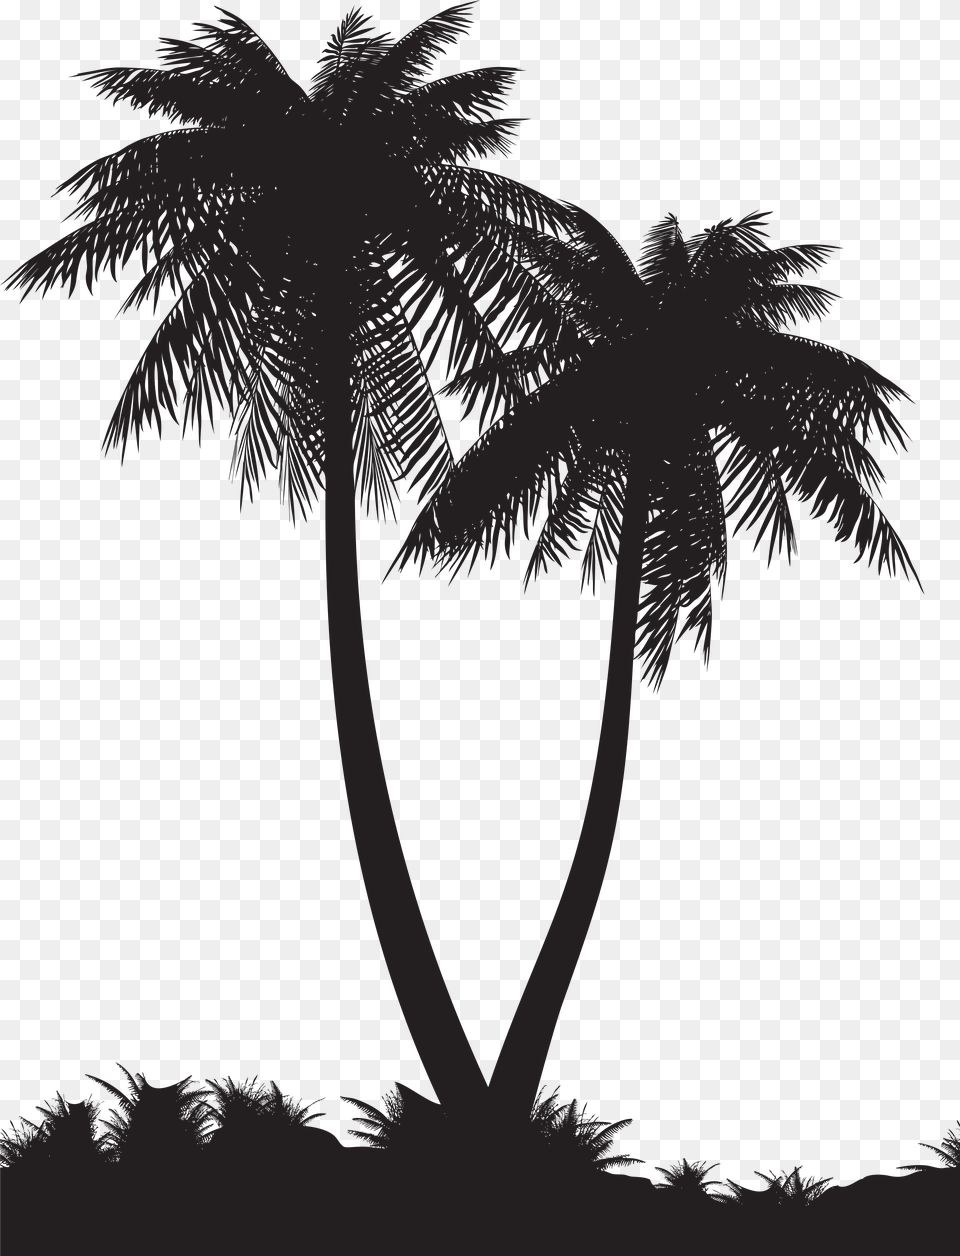 Palm Tree Silhouette Download Silhouette Of Palm Tree, Palm Tree, Plant, Outdoors Free Png